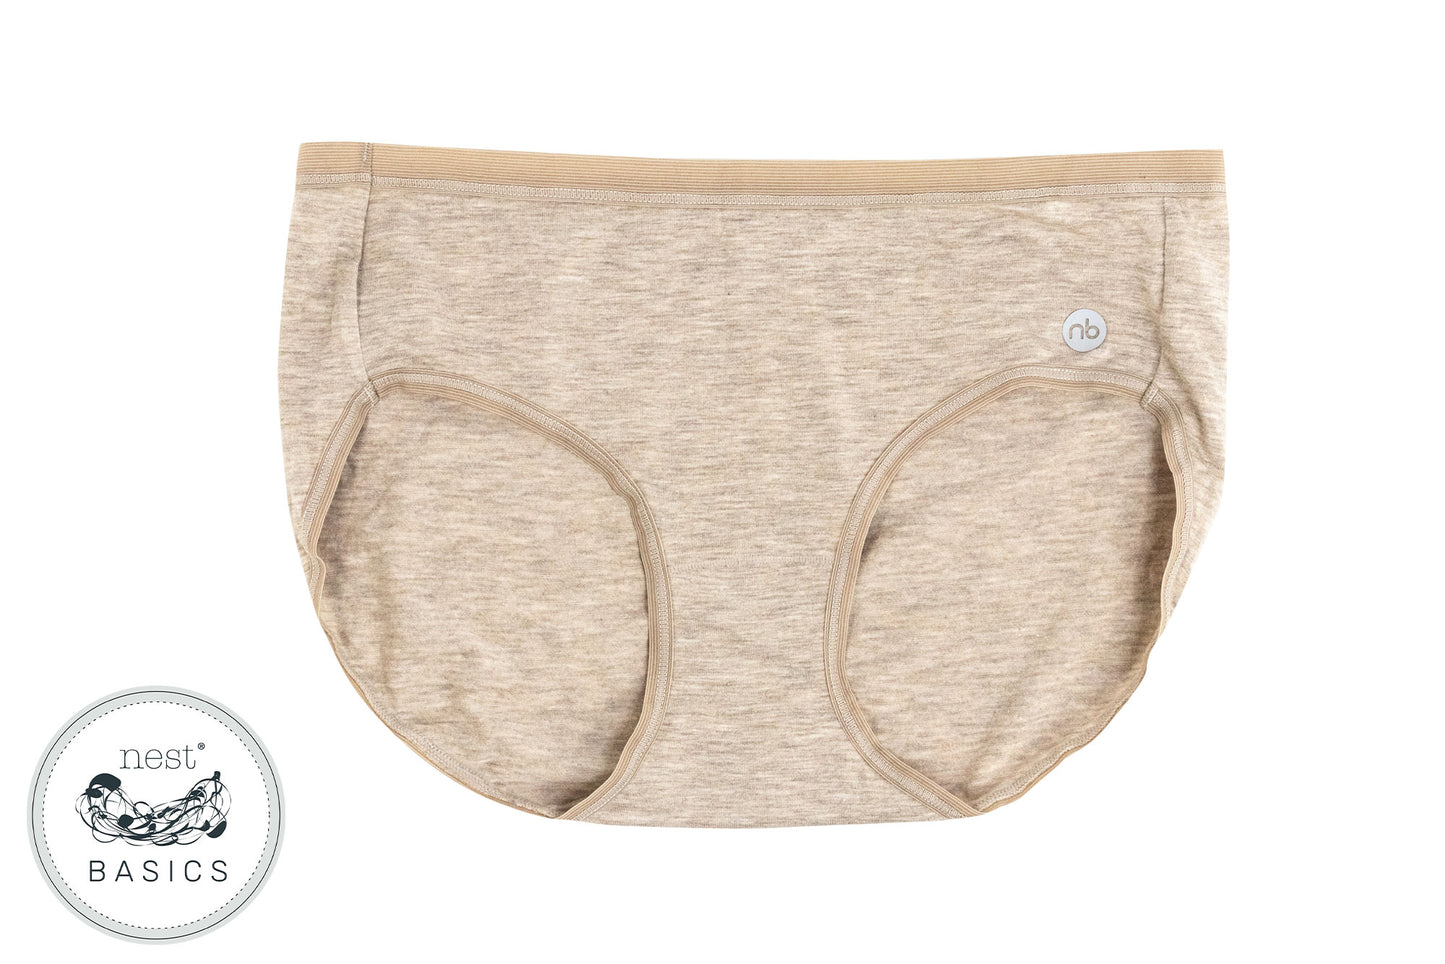 Women's Basics Underwear (Bamboo Cotton, 2 Pack) - Warm Taupe and